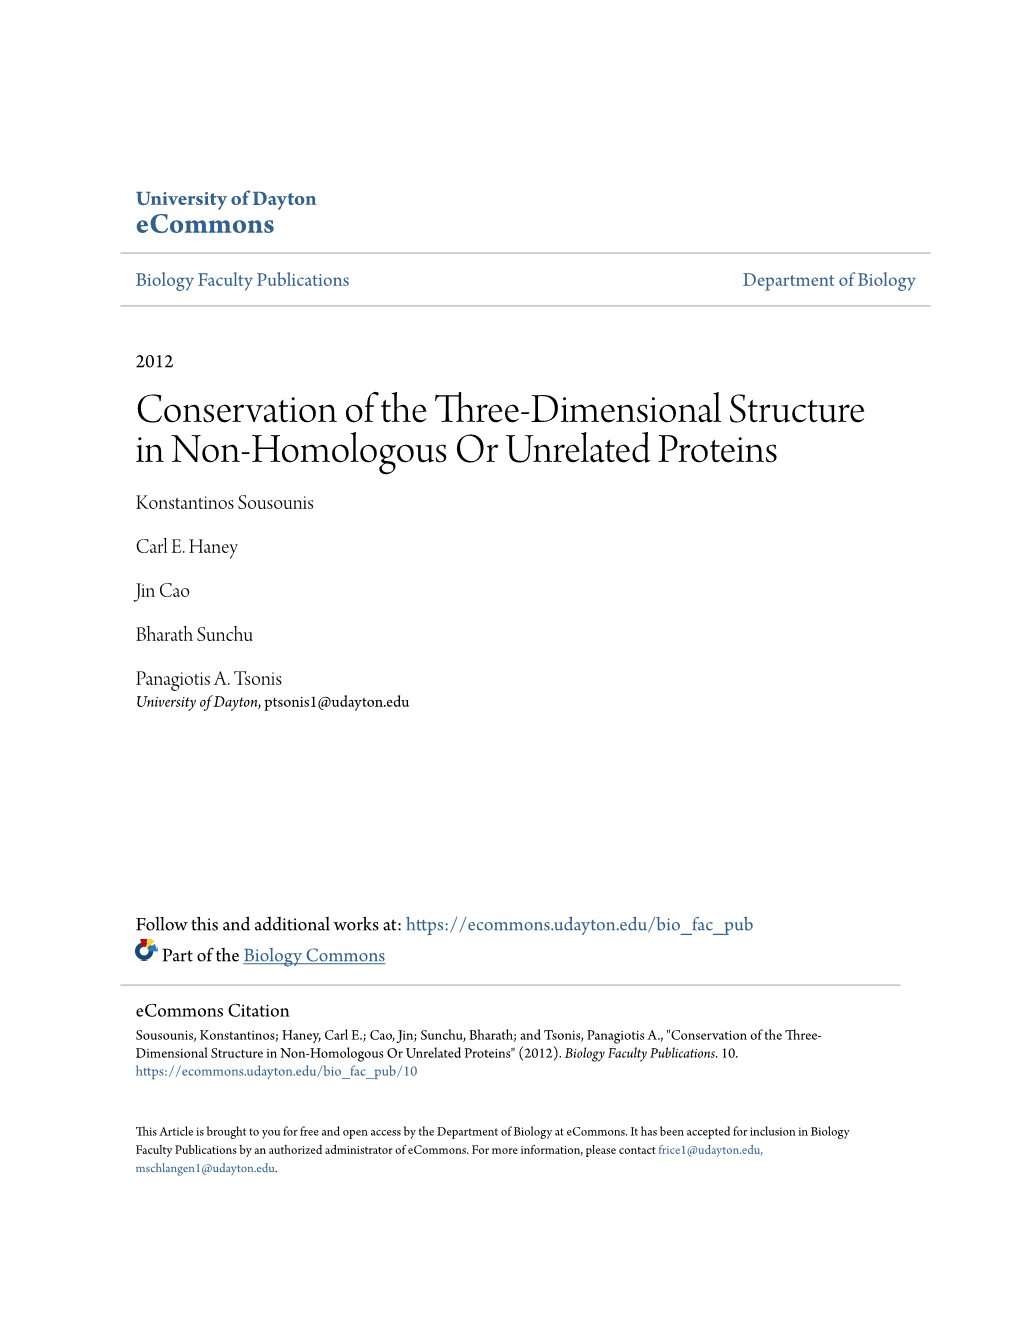 Conservation of the Three-Dimensional Structure in Non-Homologous Or Unrelated Proteins Konstantinos Sousounis